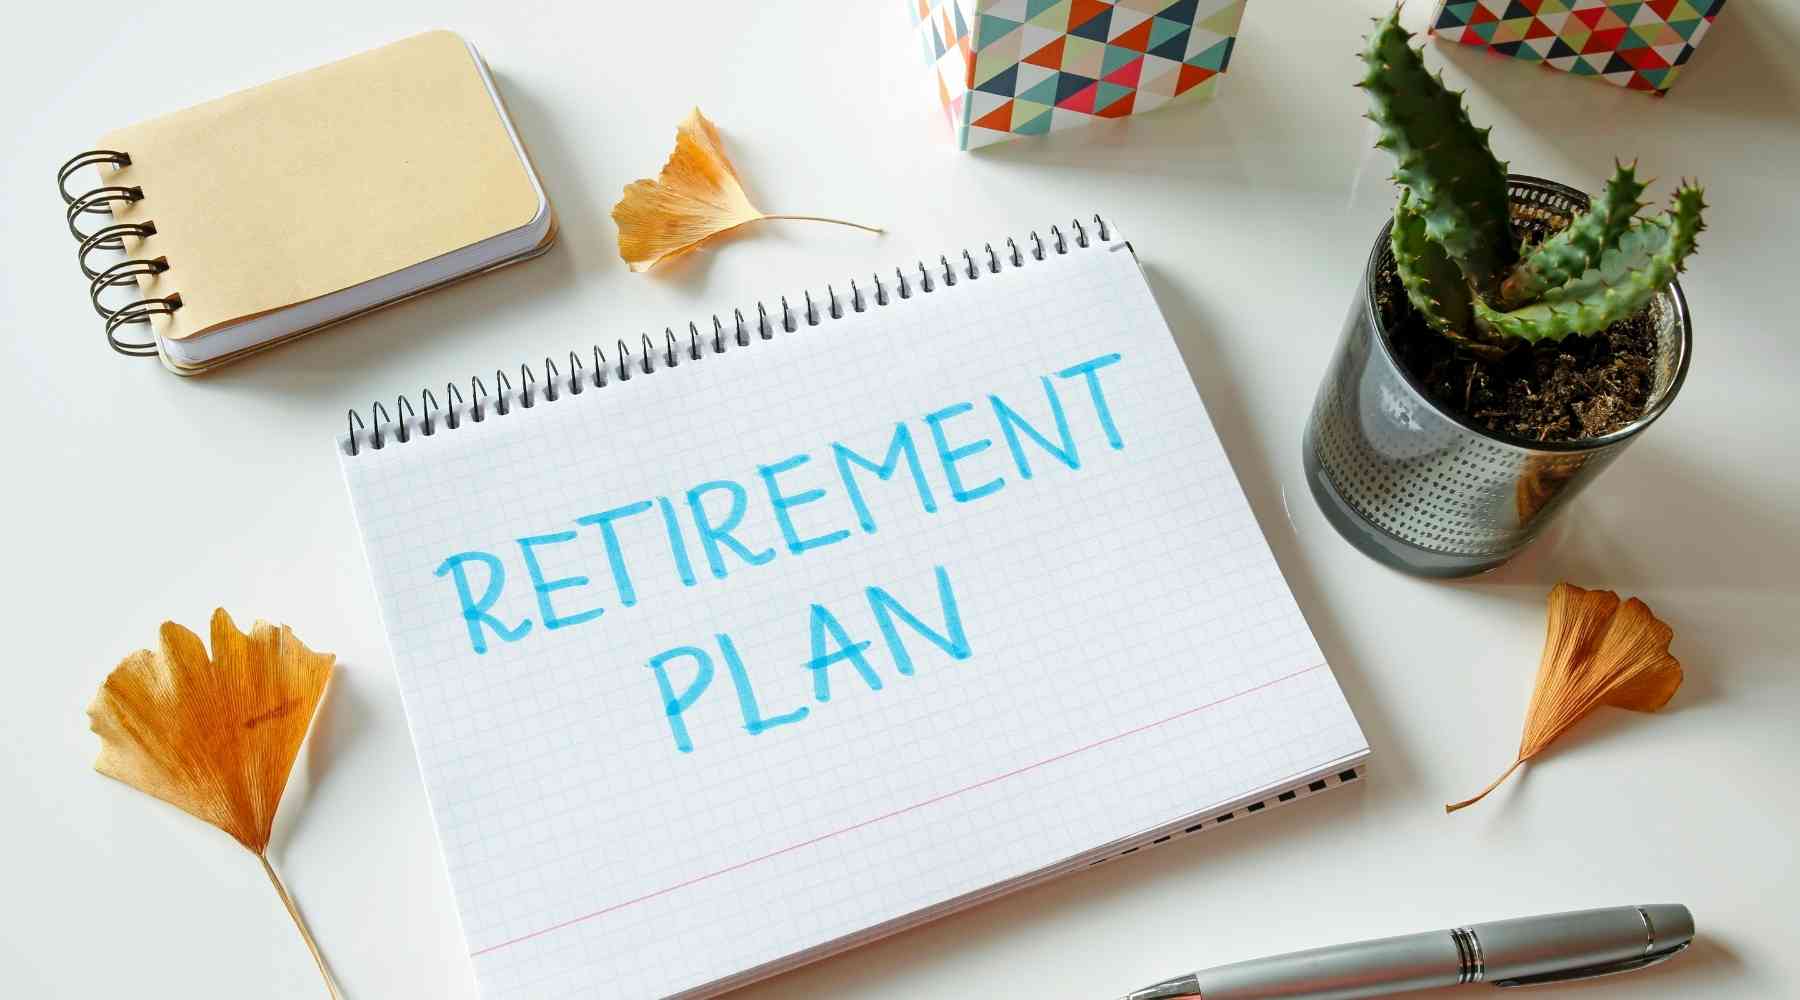 Become Fiscally Responsible - Invest for Retirement